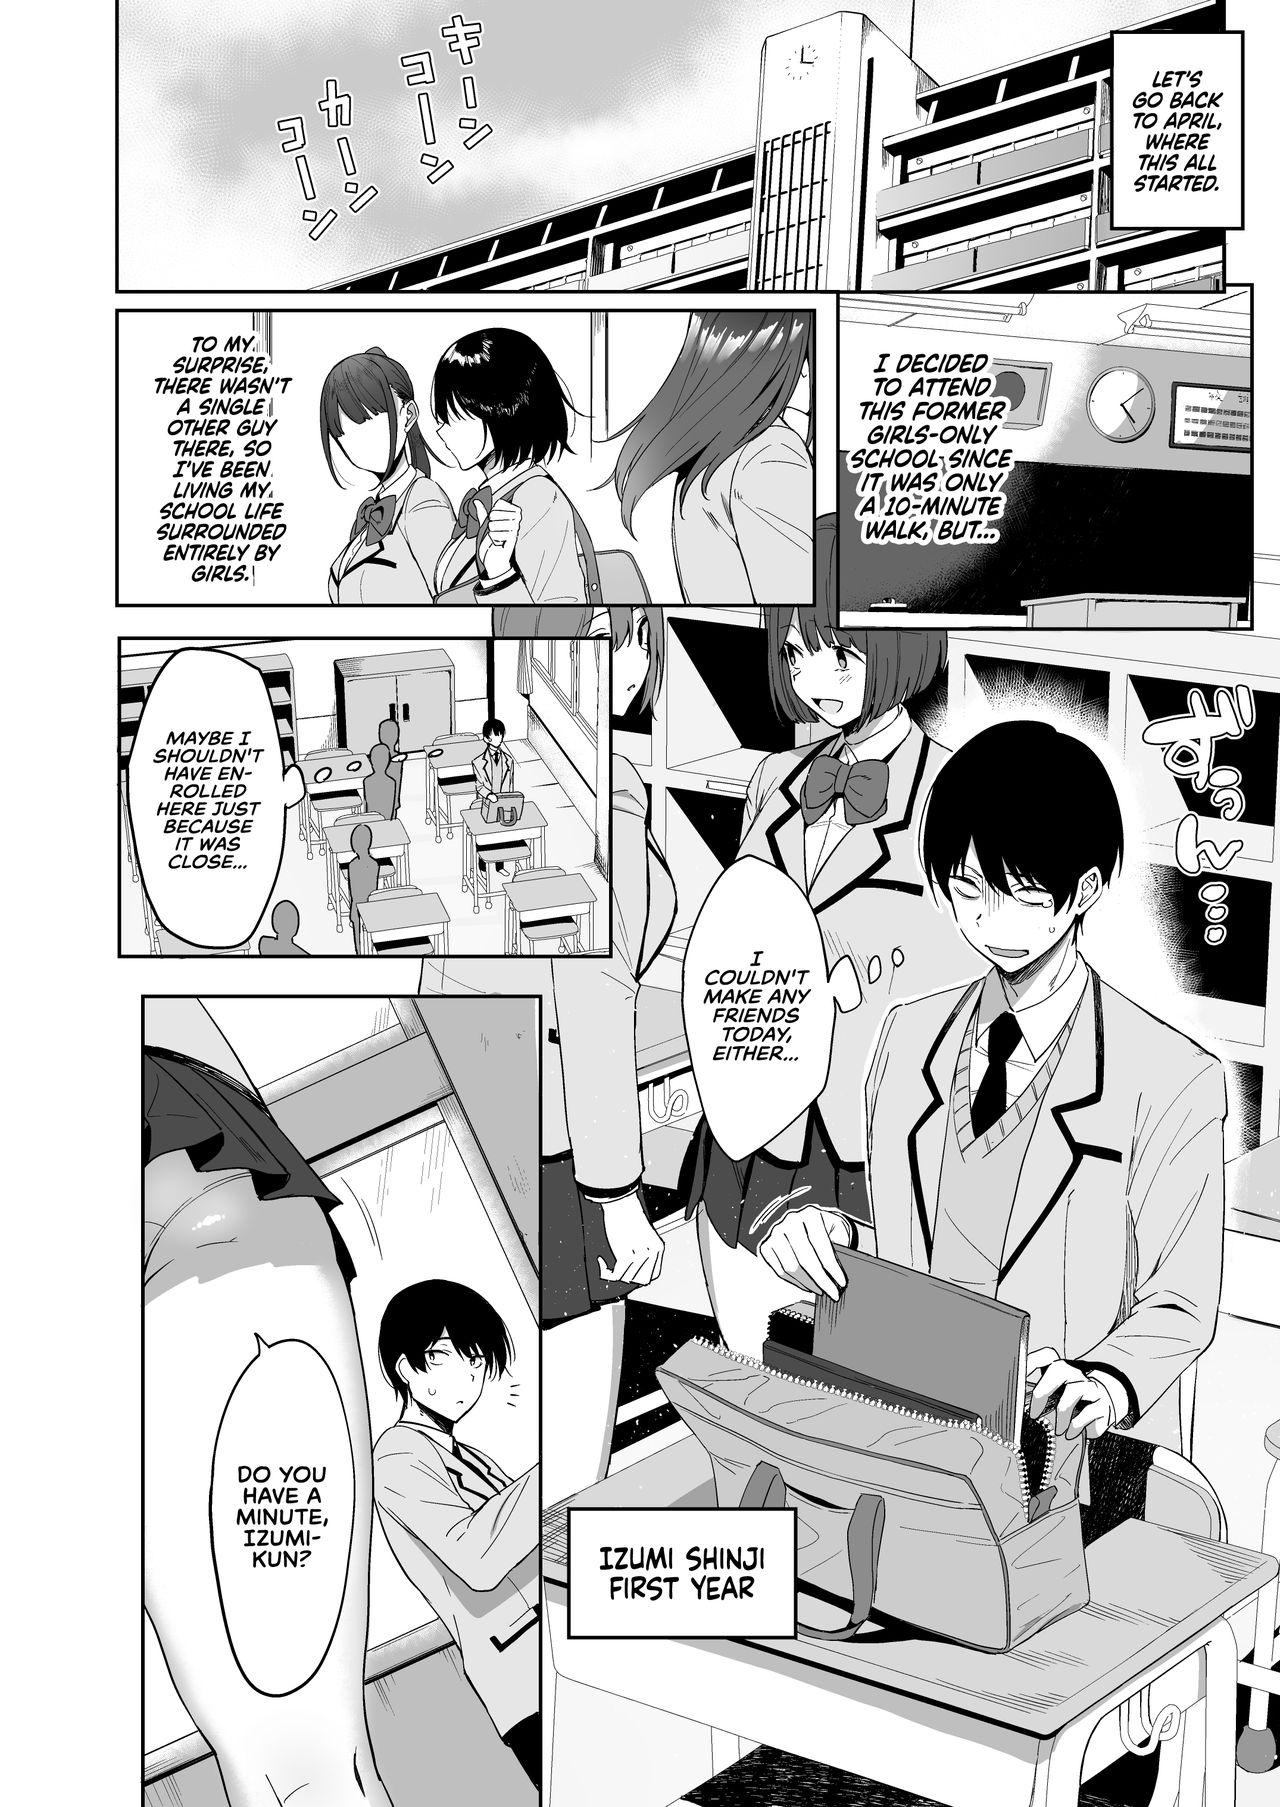 Anal Fuck Fuuki Iin to Fuuzoku Katsudou | SEX ACTS with a Member of the Public Moral Committee - Original Trans - Page 7